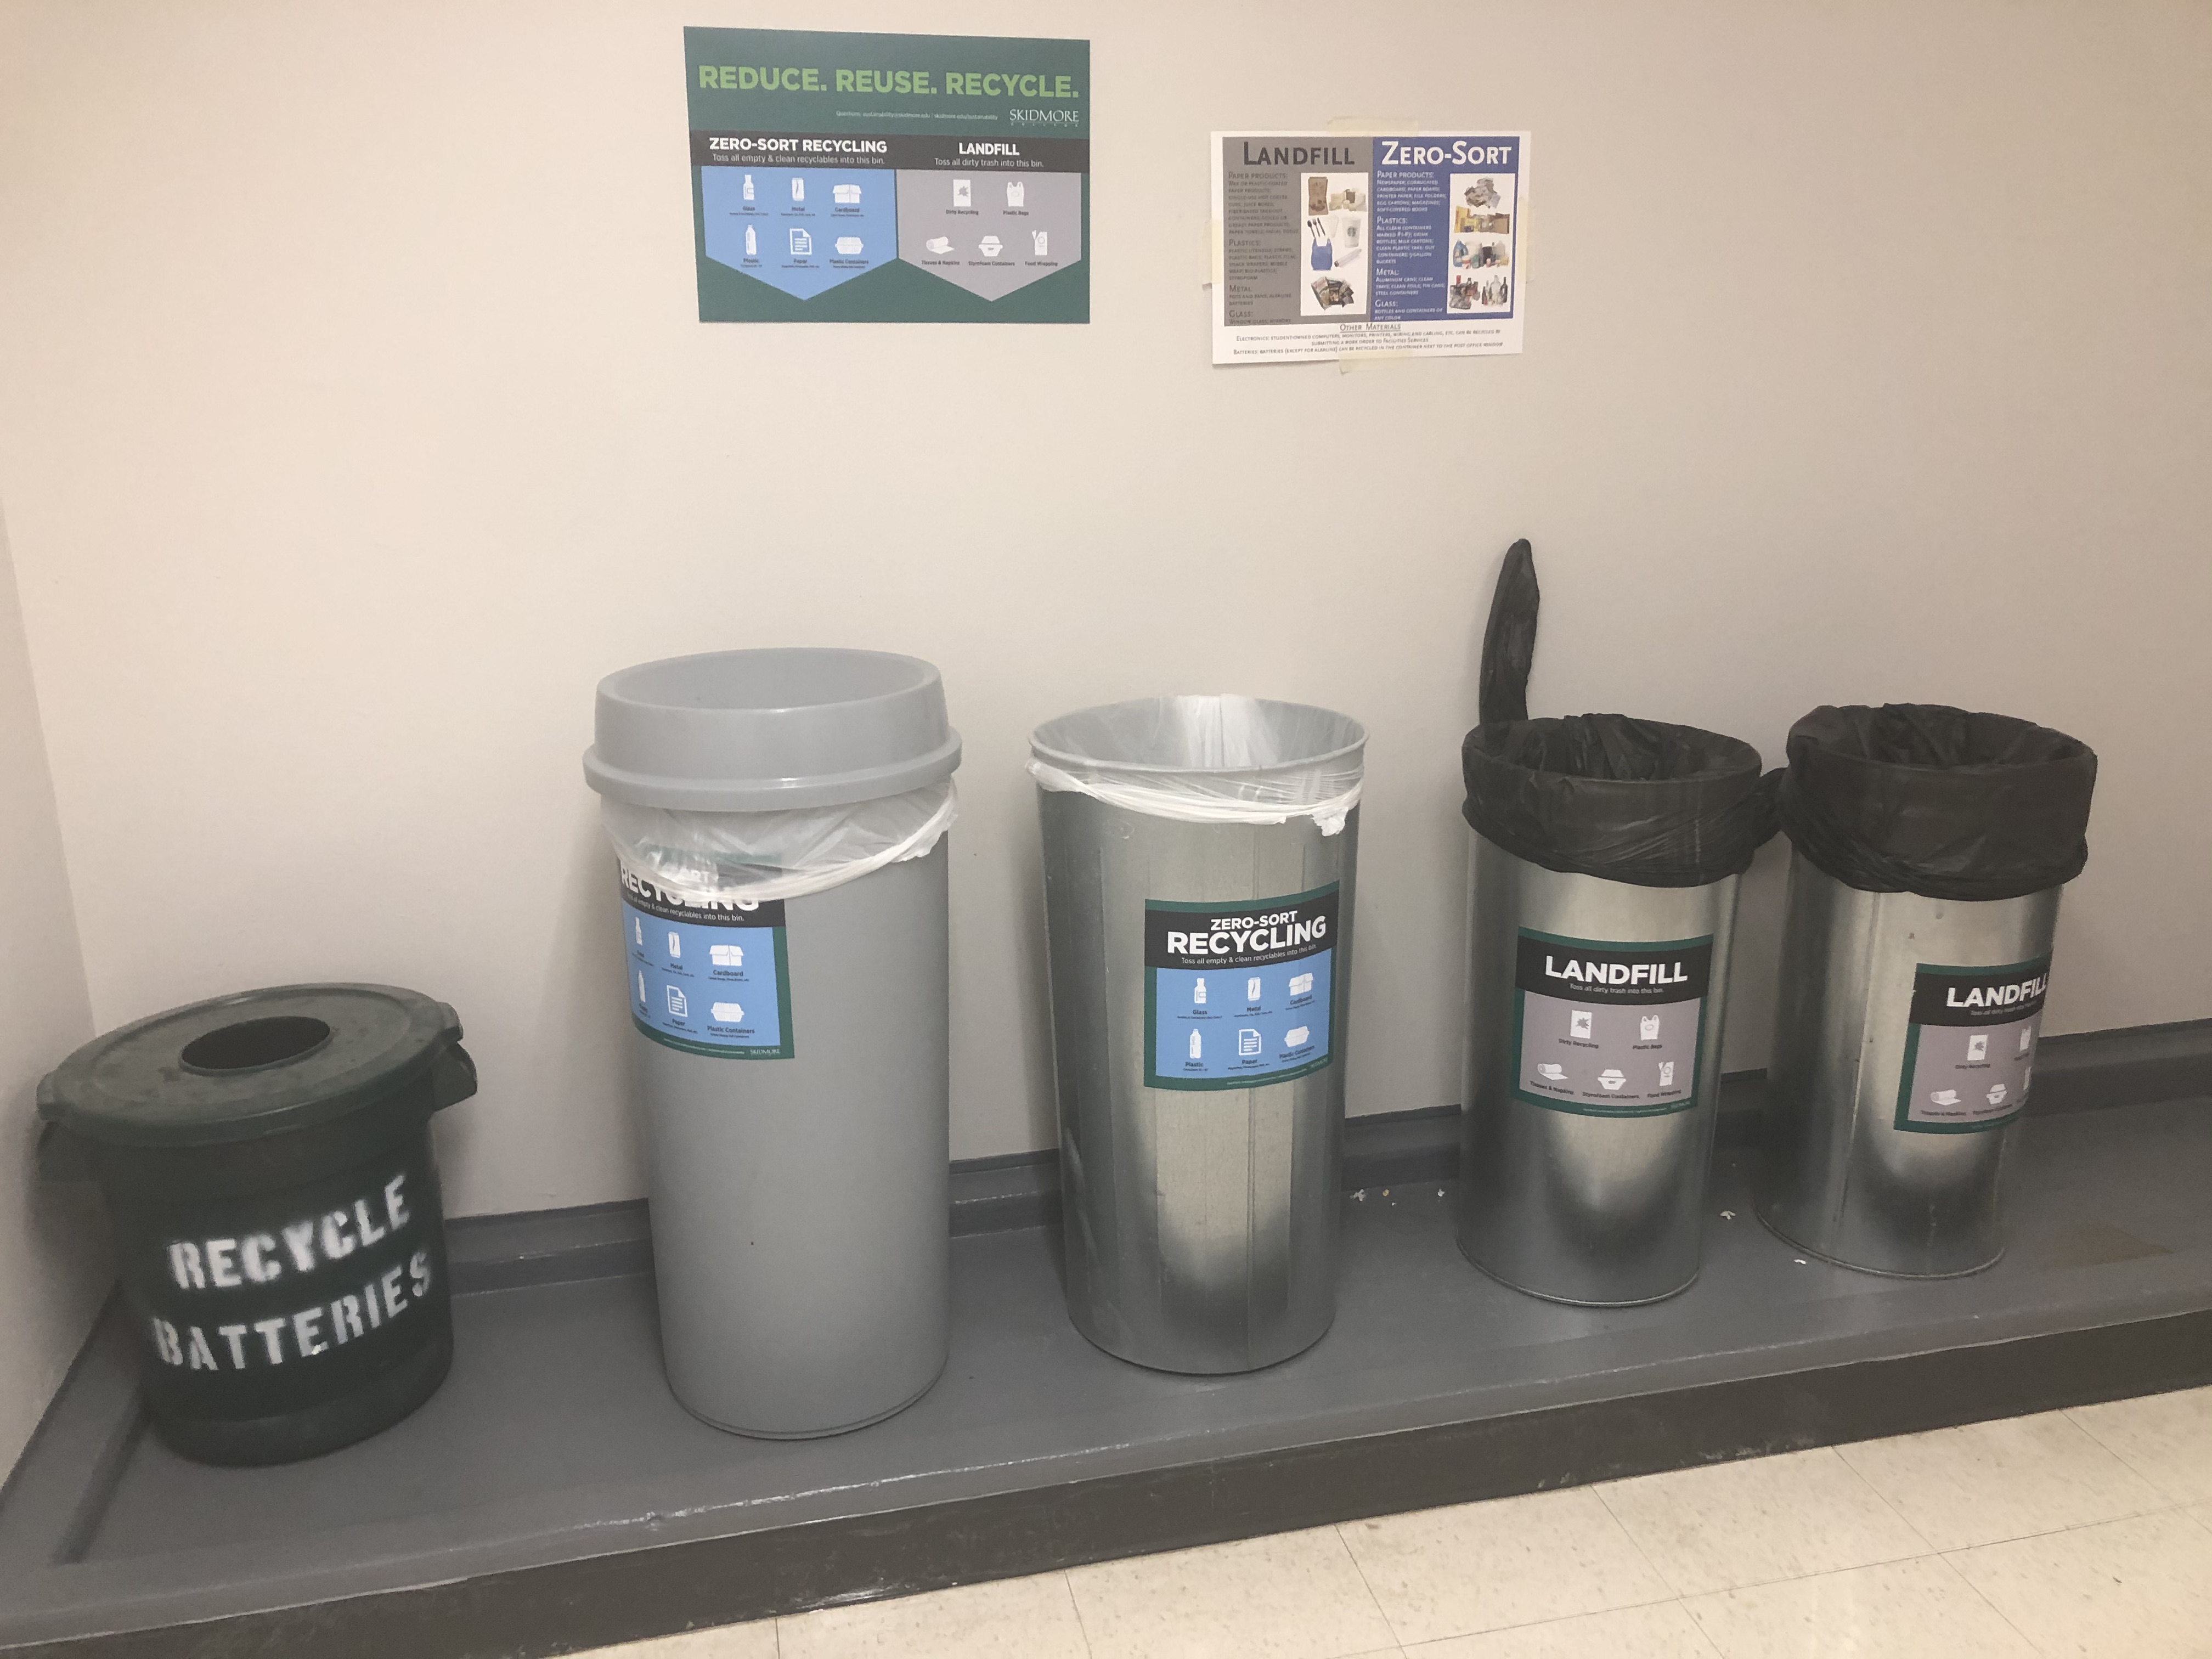 5 bins lined up next to each other in a hall kitchen space. 1 gray bin for batteries, 2 tall bins labelled recycling and 2 tall bins labelled landfill.